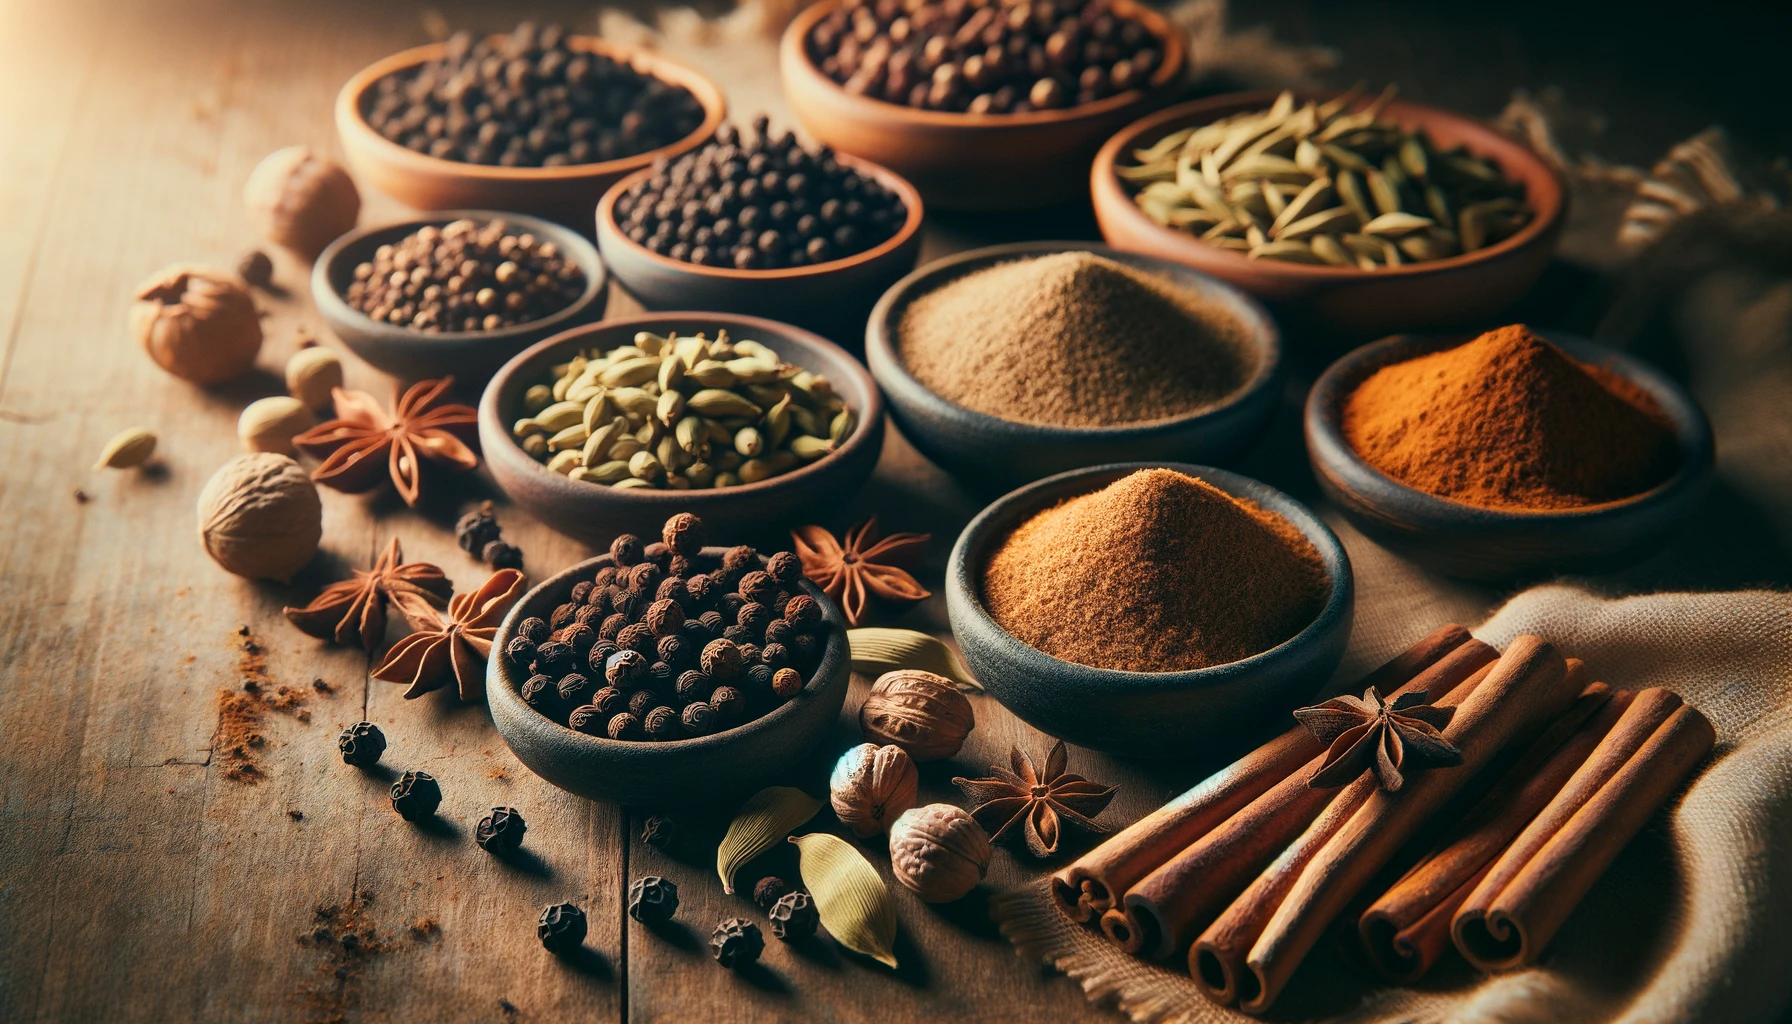 Garam Masala is a popular Indian spice blend used in various Indian dishes to enhance their flavor. It's easy to make at home with a variety of spices.